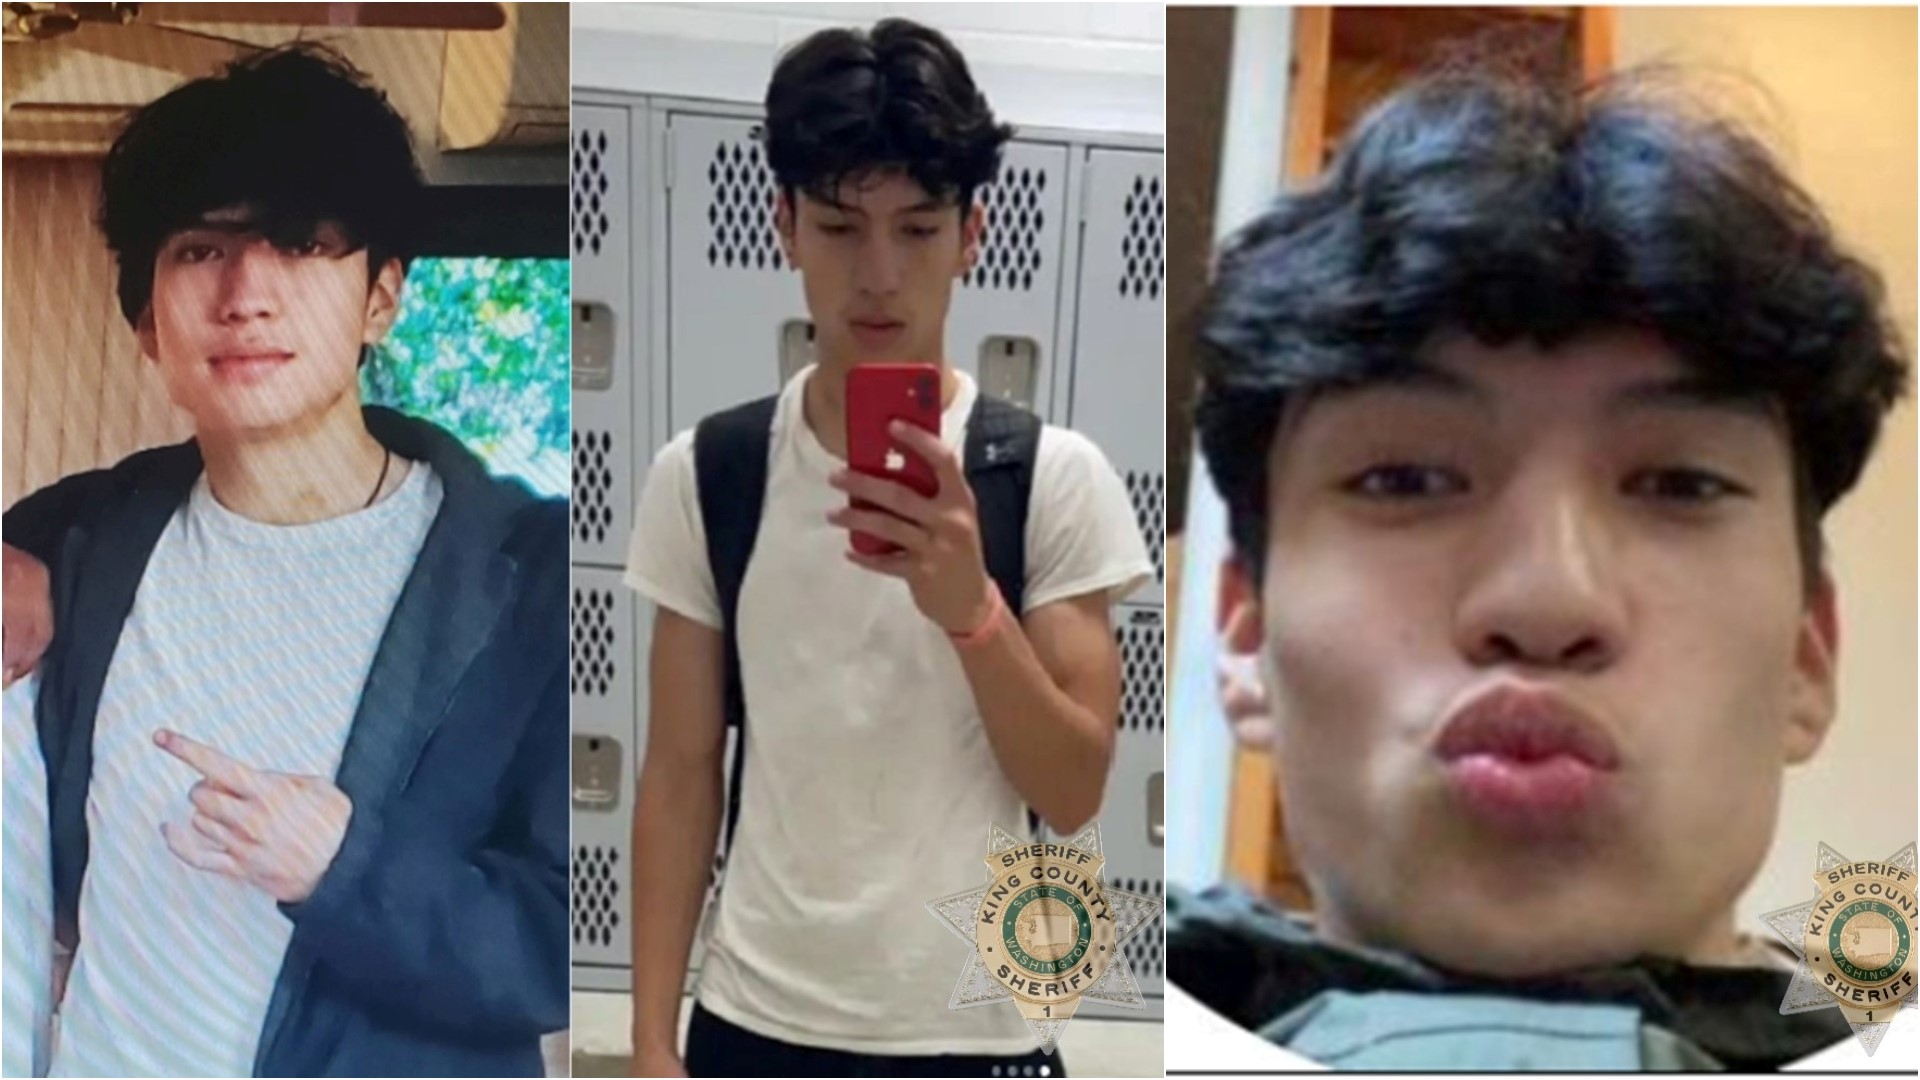 After remaining at large for over a month, 17-year-old Miguel Rivera Dominguez is now booked in jail, according to the King County Sheriff's Office.